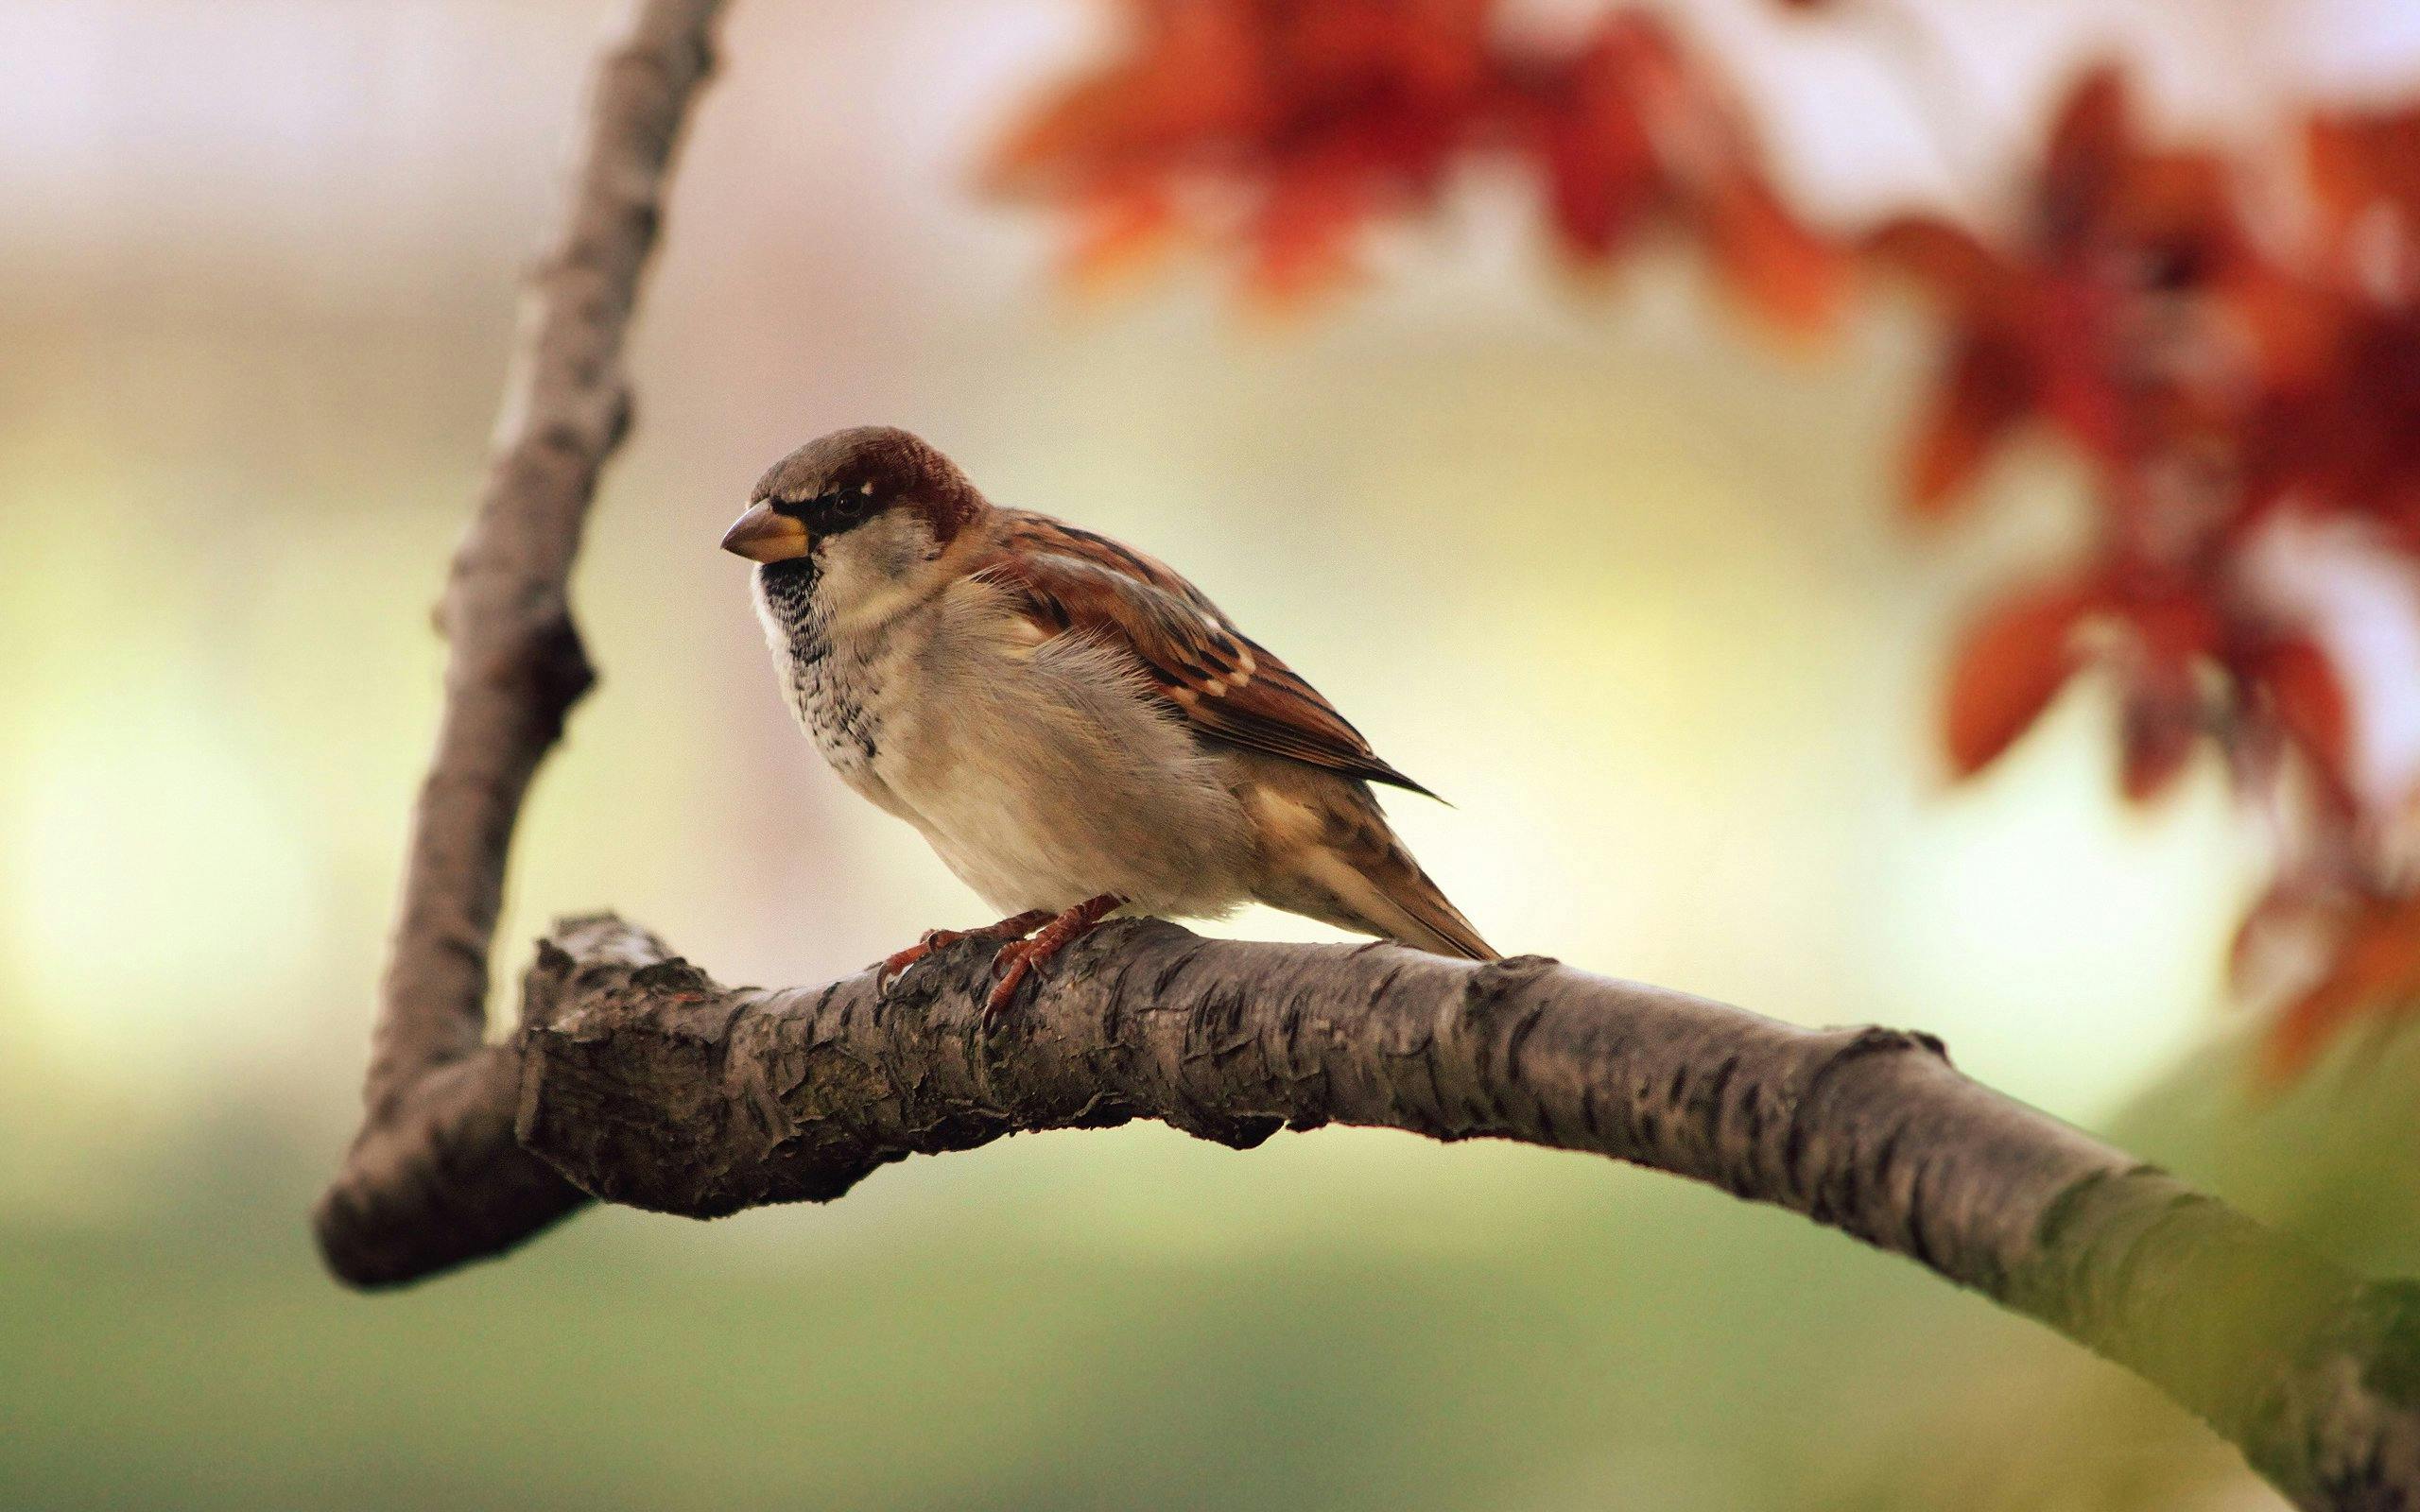 Sparrow HD Wallpaper for Android